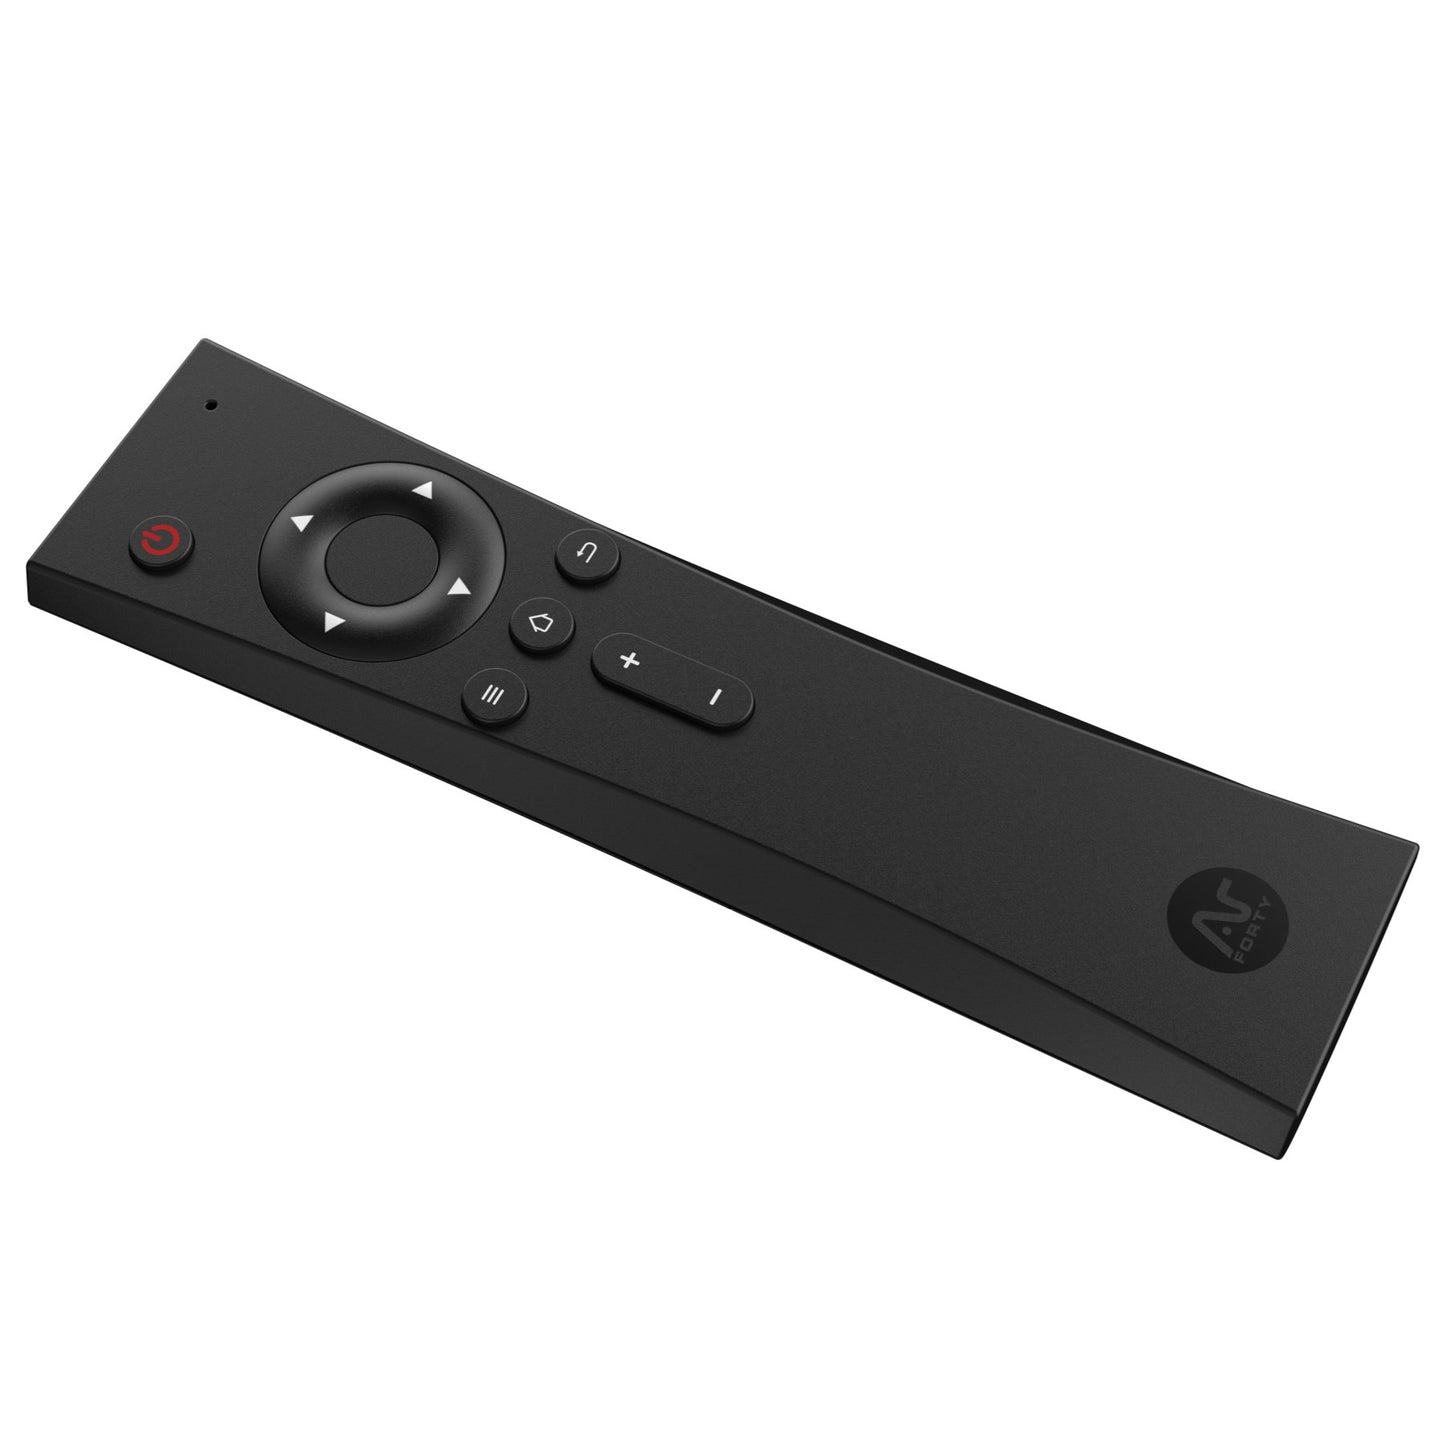 Argon Remote for V2 and M.2 Case